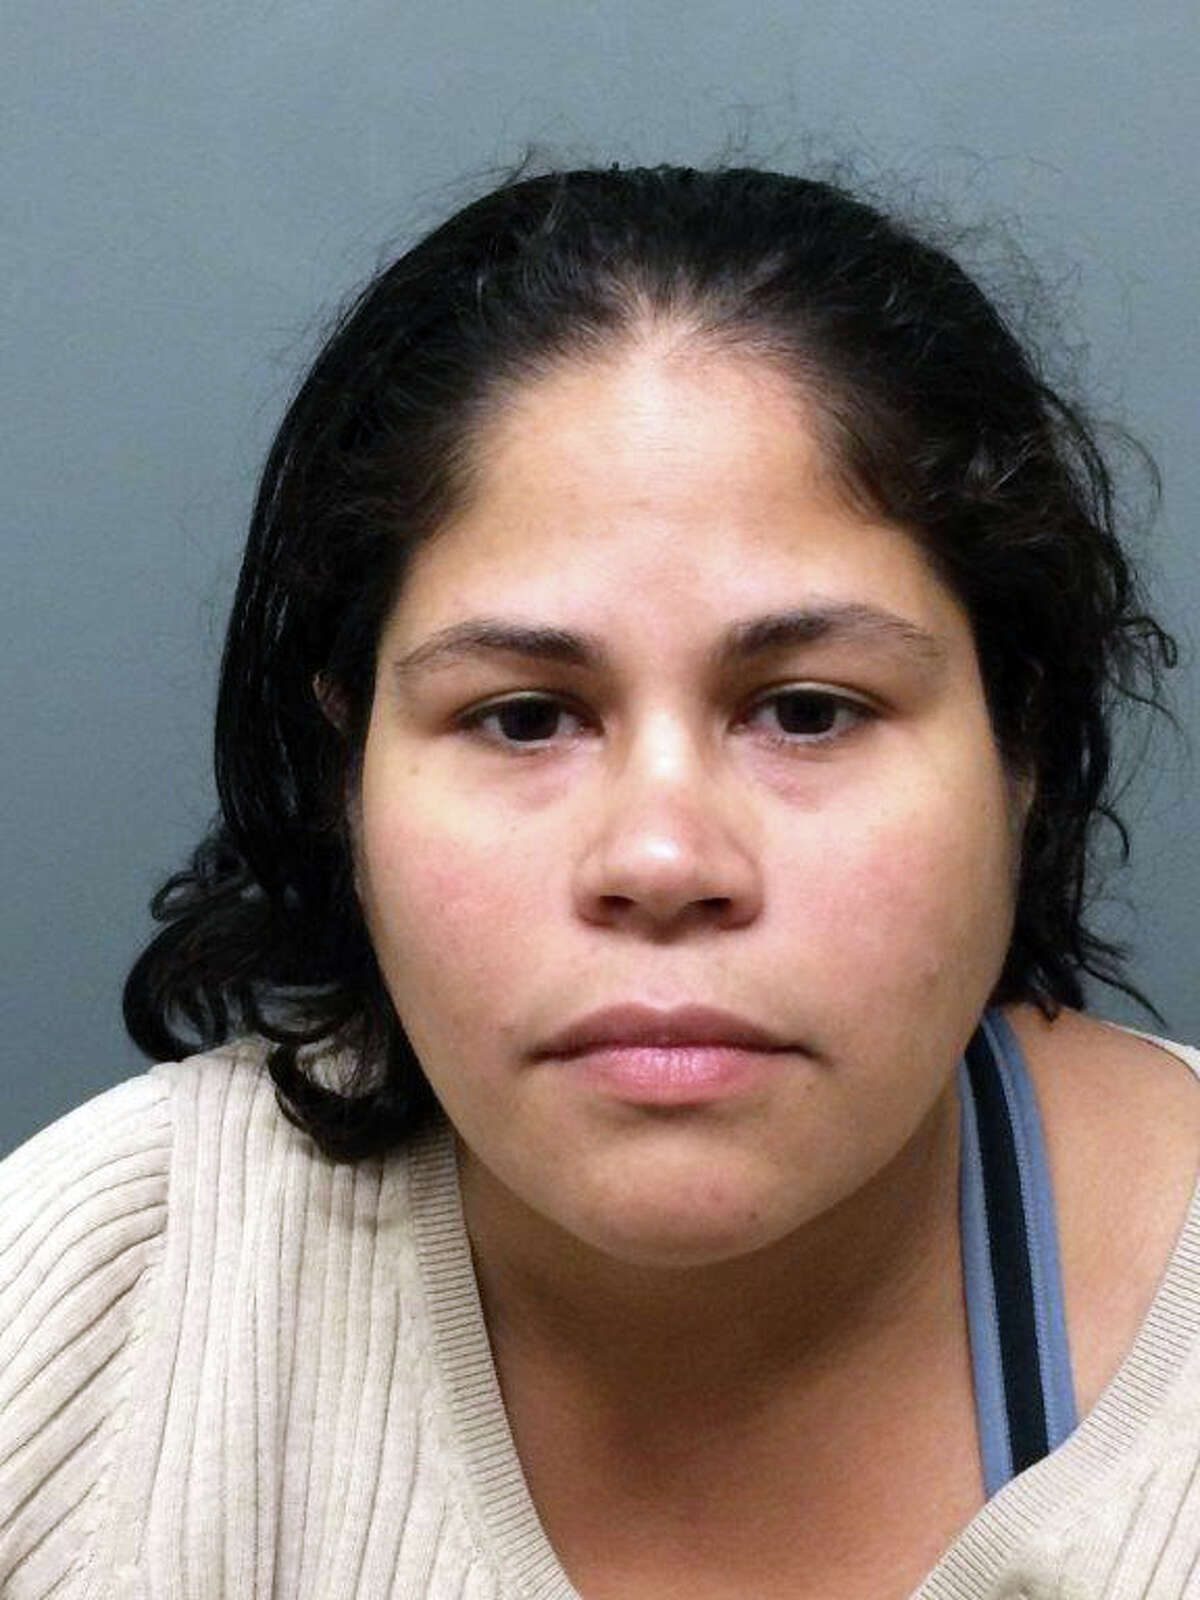 Marisol Garcia, 37, of 28 Aiken Street, Norwalk was sentenced to five years in jail for stealing nearly $40,000 from two doctors she was working for in Darien.